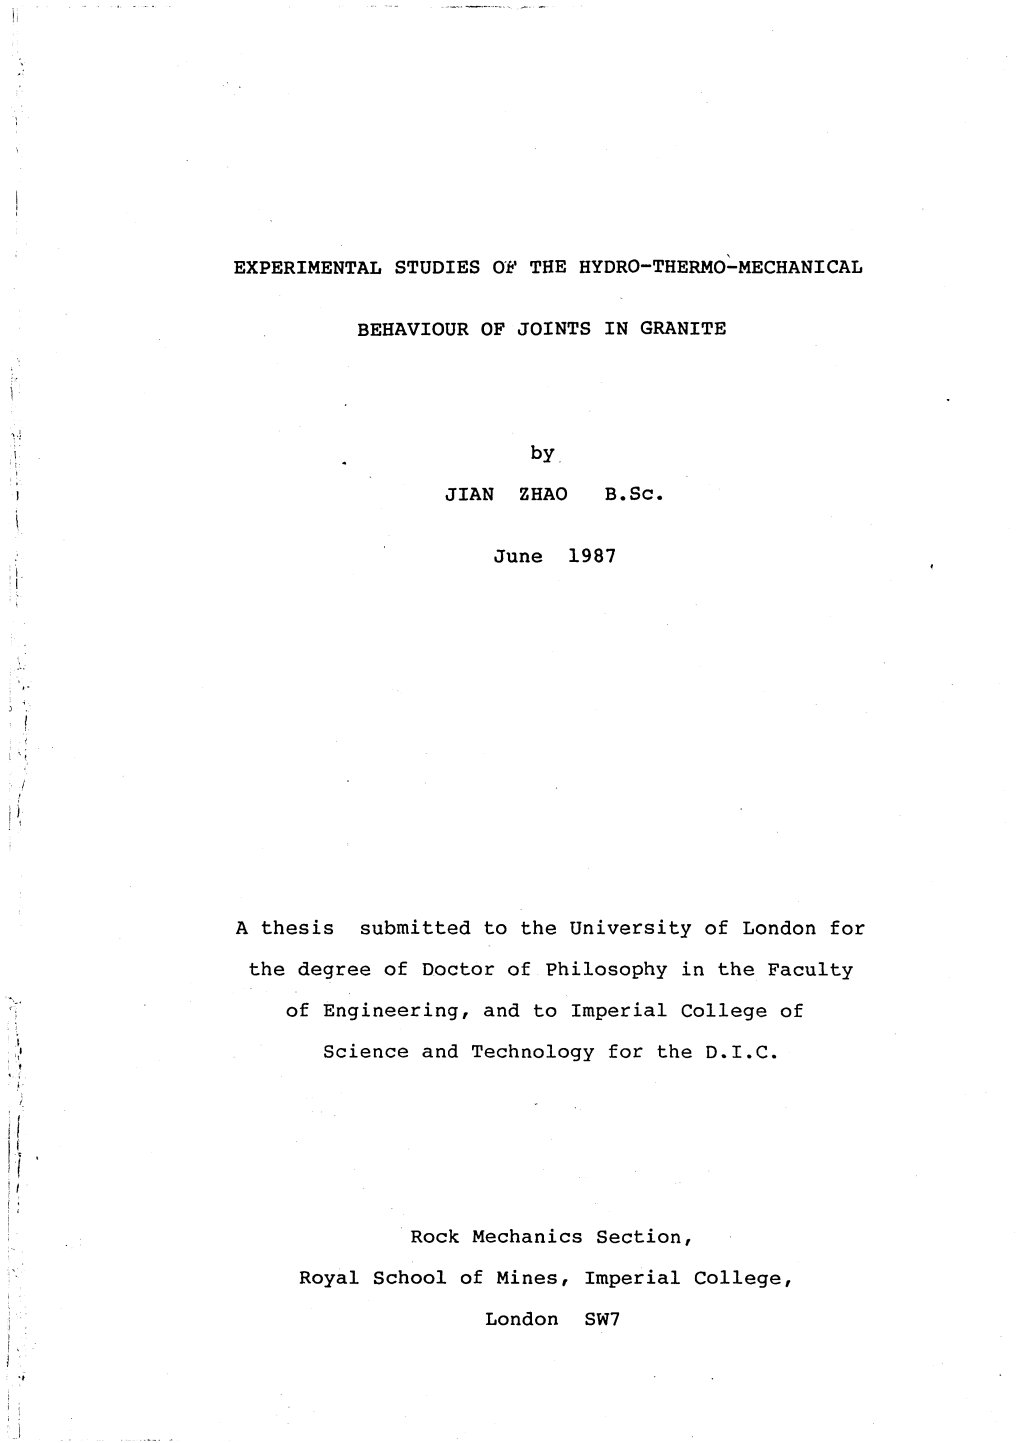 Experimental Studies of the Hydro-Thermo-Mechanical